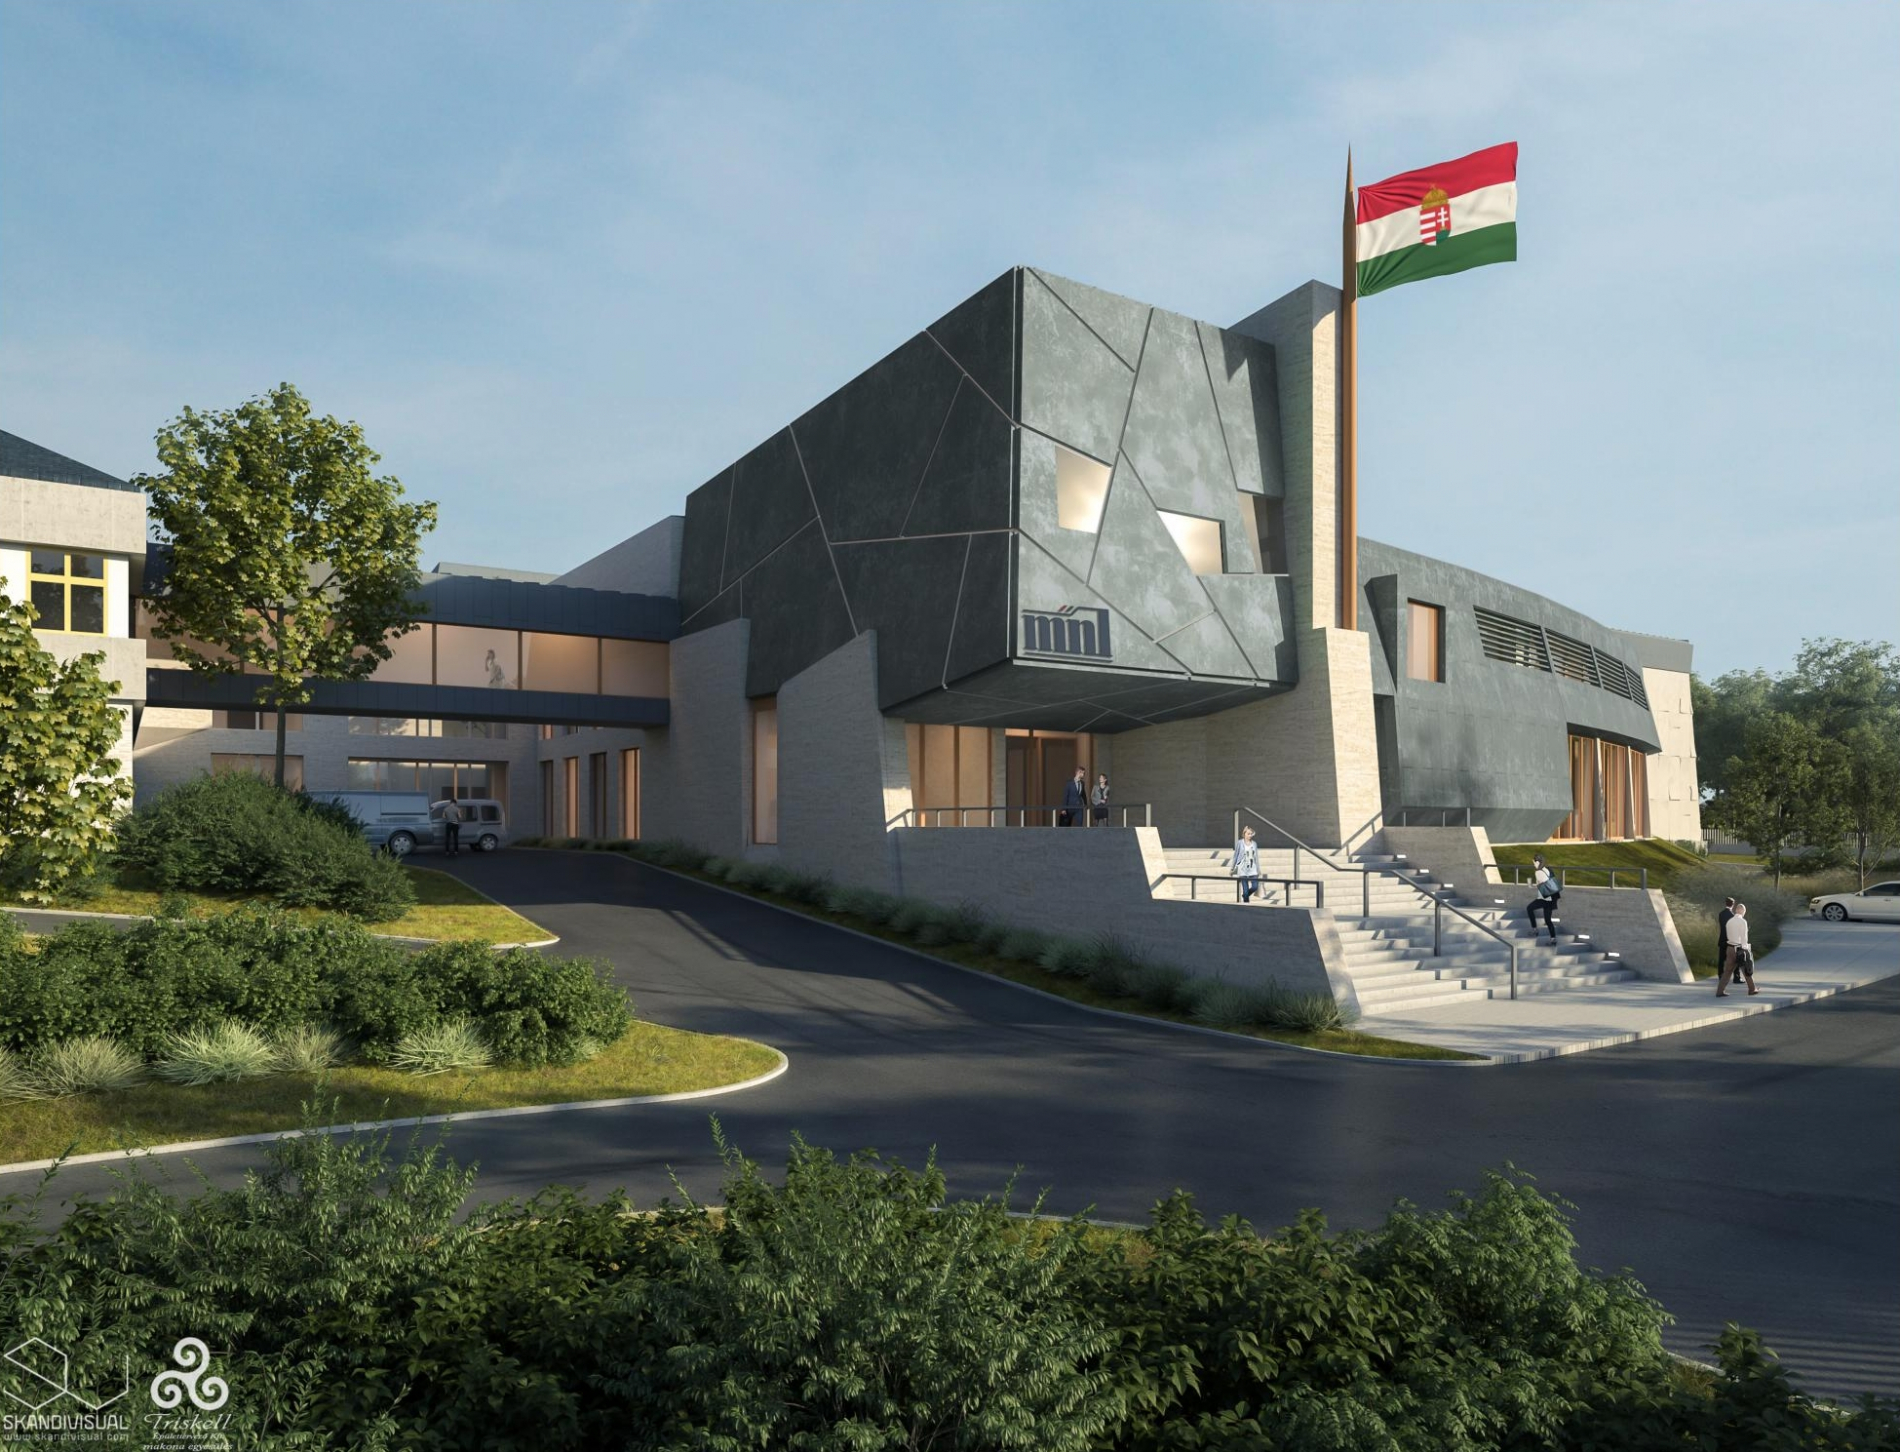 Hungarian National Archives to be revamped and expanded across two sites